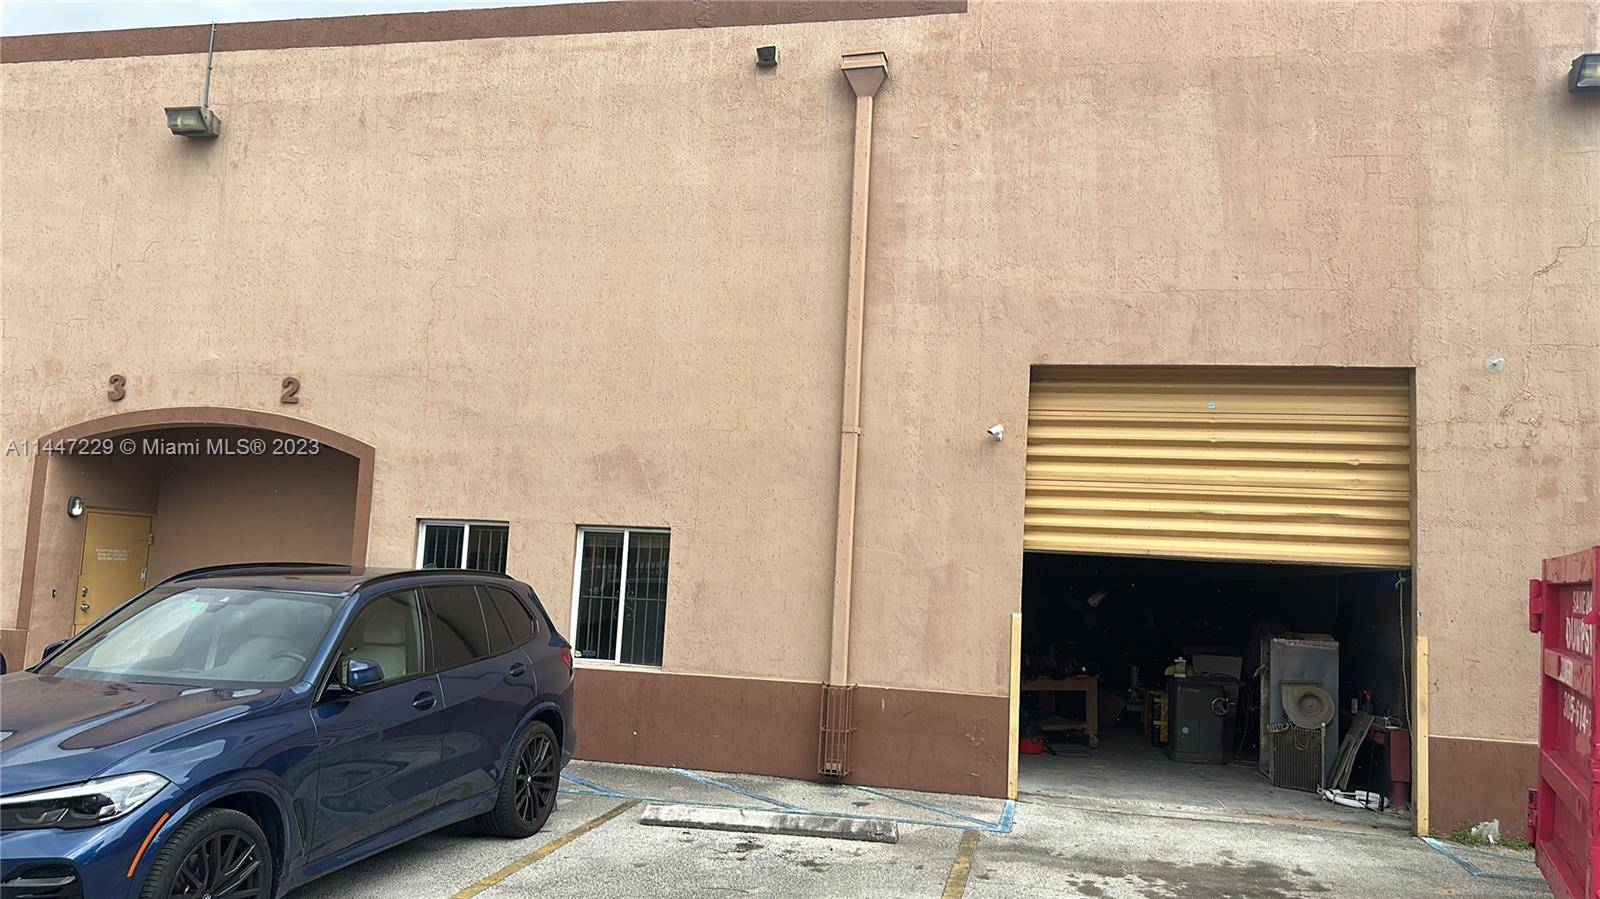 Very well located warehouse close to Palmetto expressway and I 75, 2, 970sft of space with office, 20ft height ceiling, a c ducts in place if tenant needs refrigeration in ...